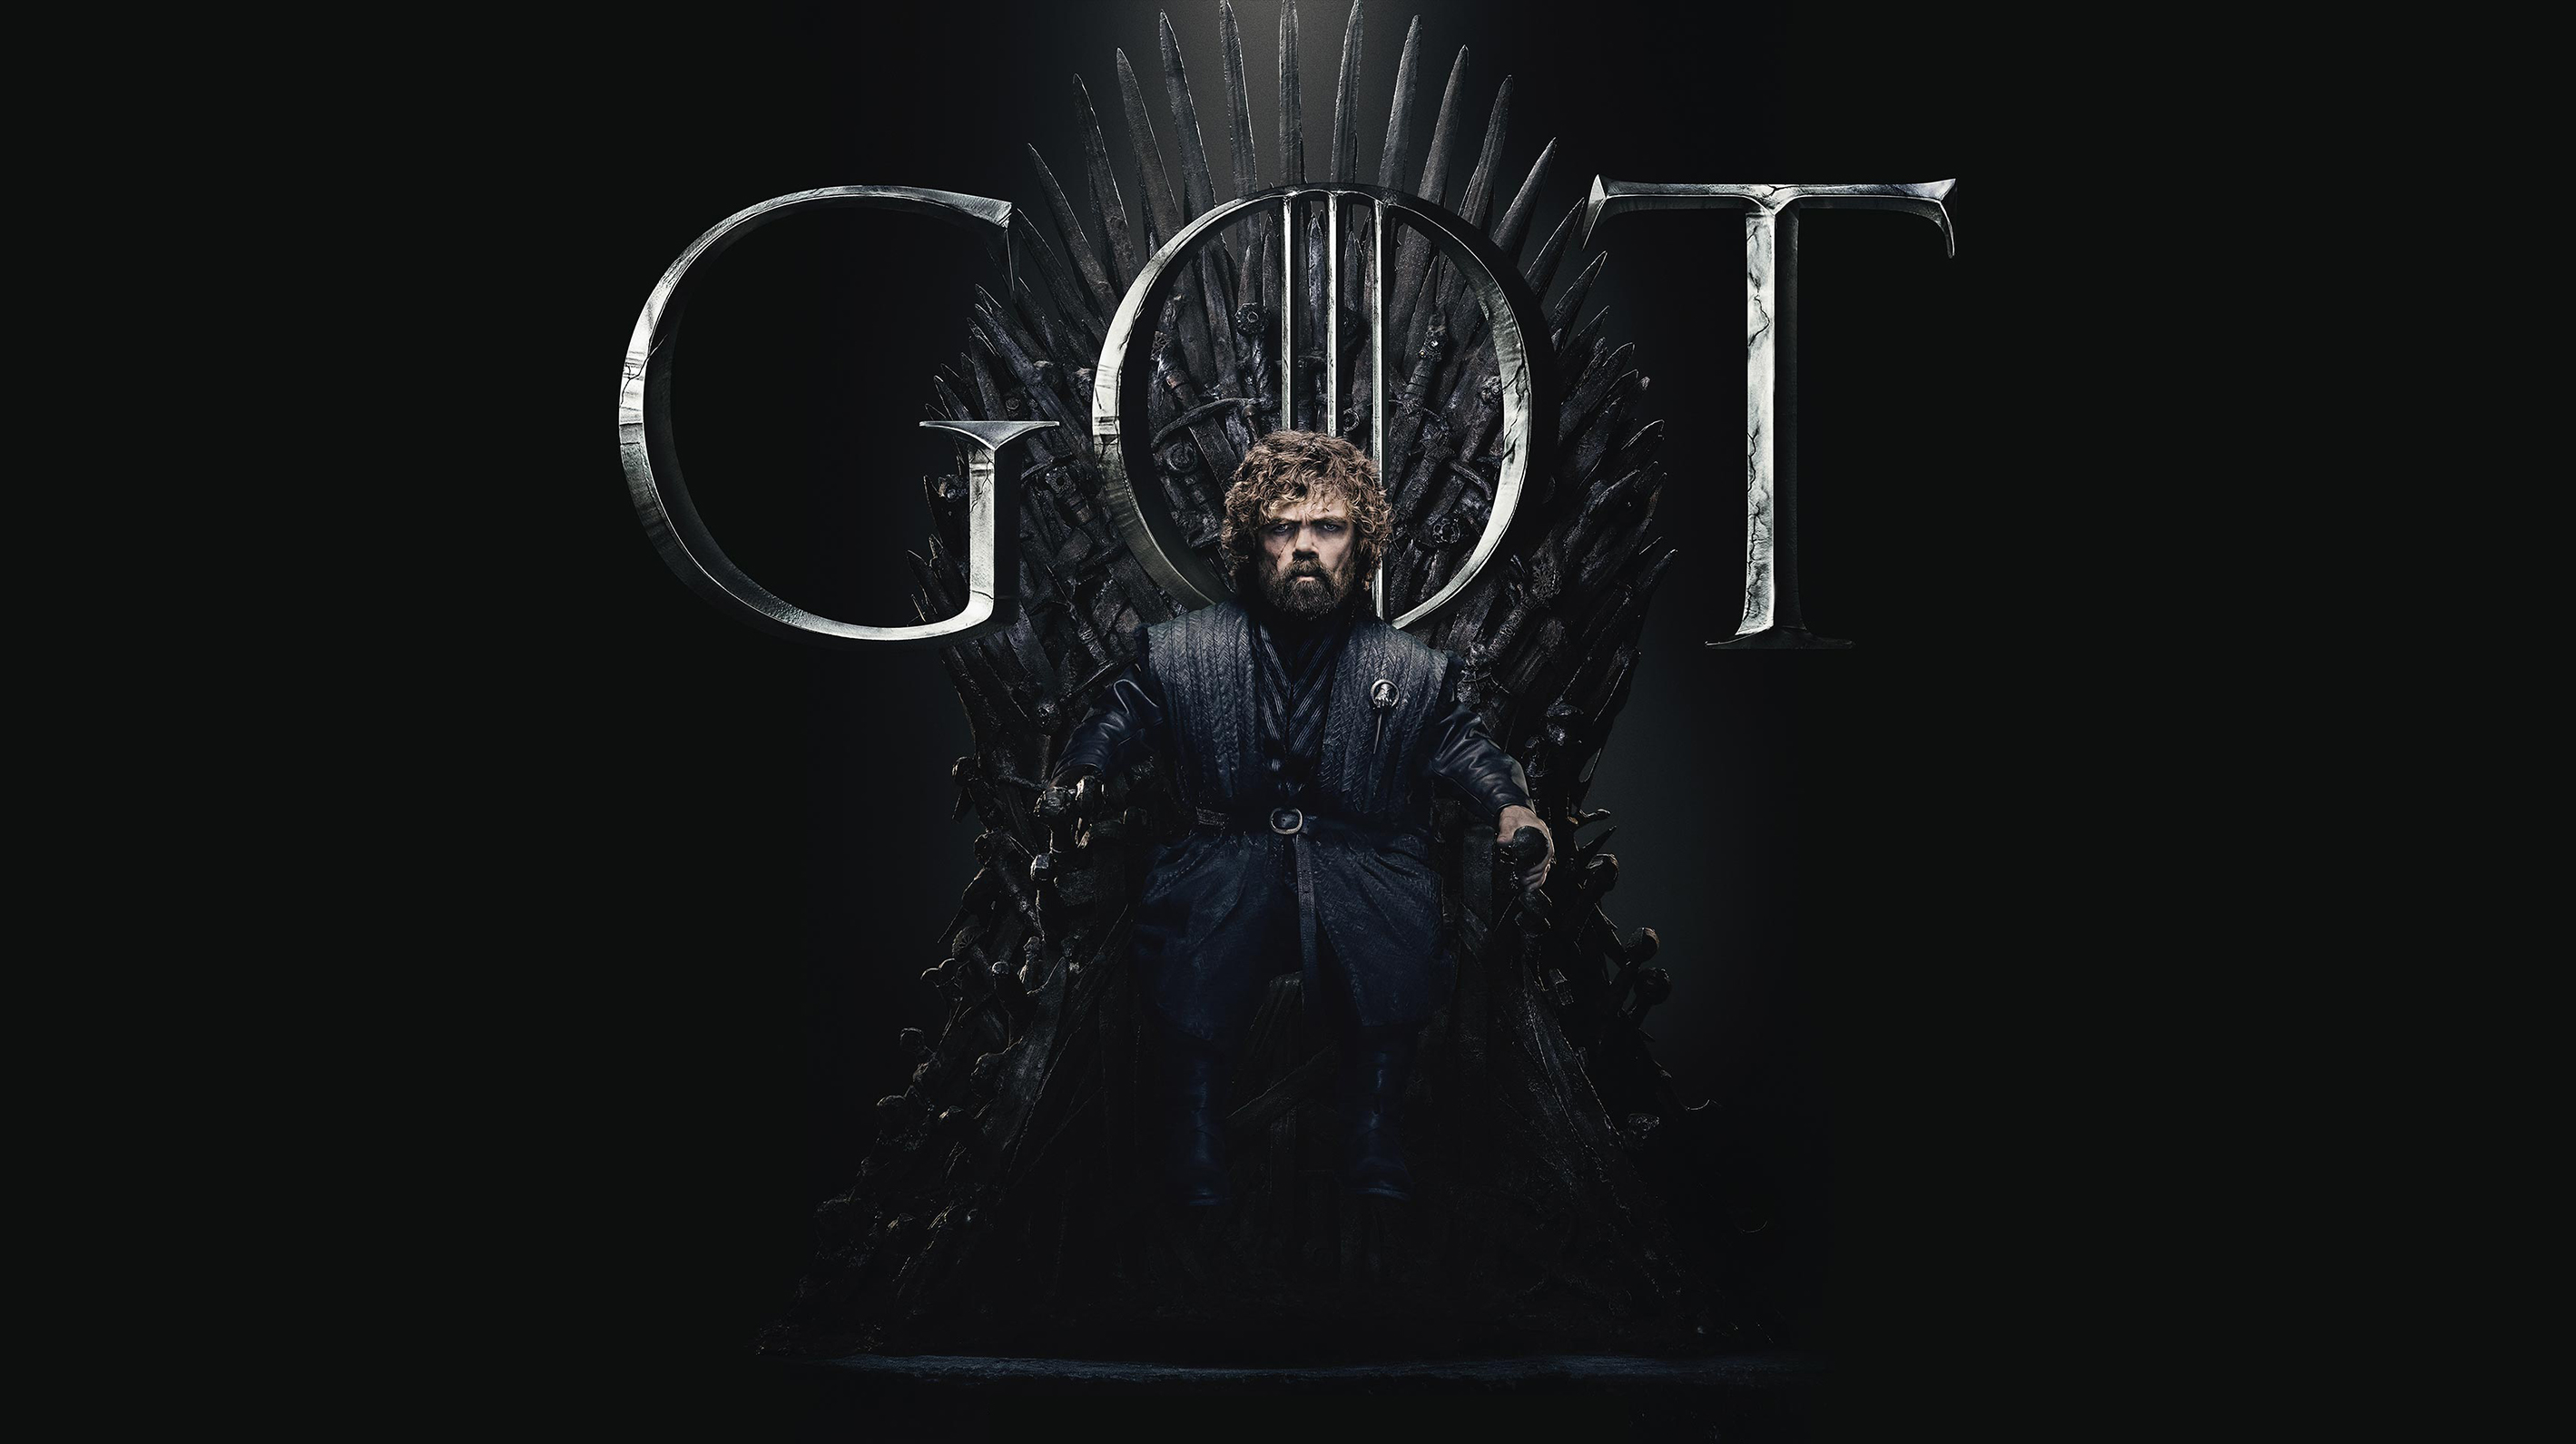 tyrion-lannister-game-of-thrones-season-8-poster-wallpaper-hd-tv